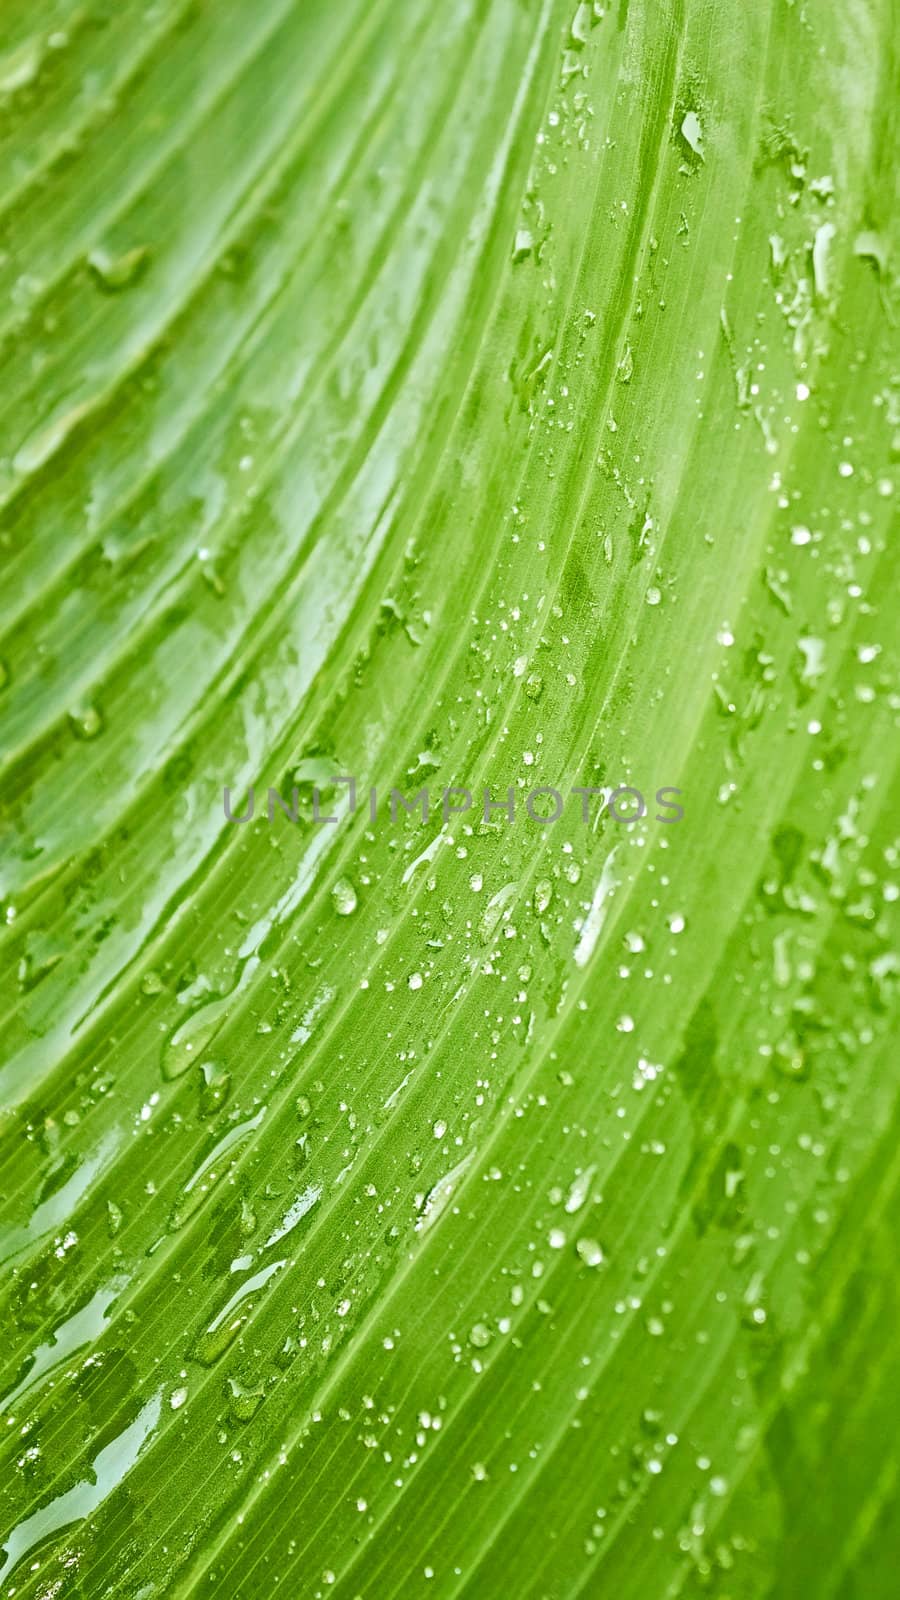 Large green leaf with rain drops  by qiiip